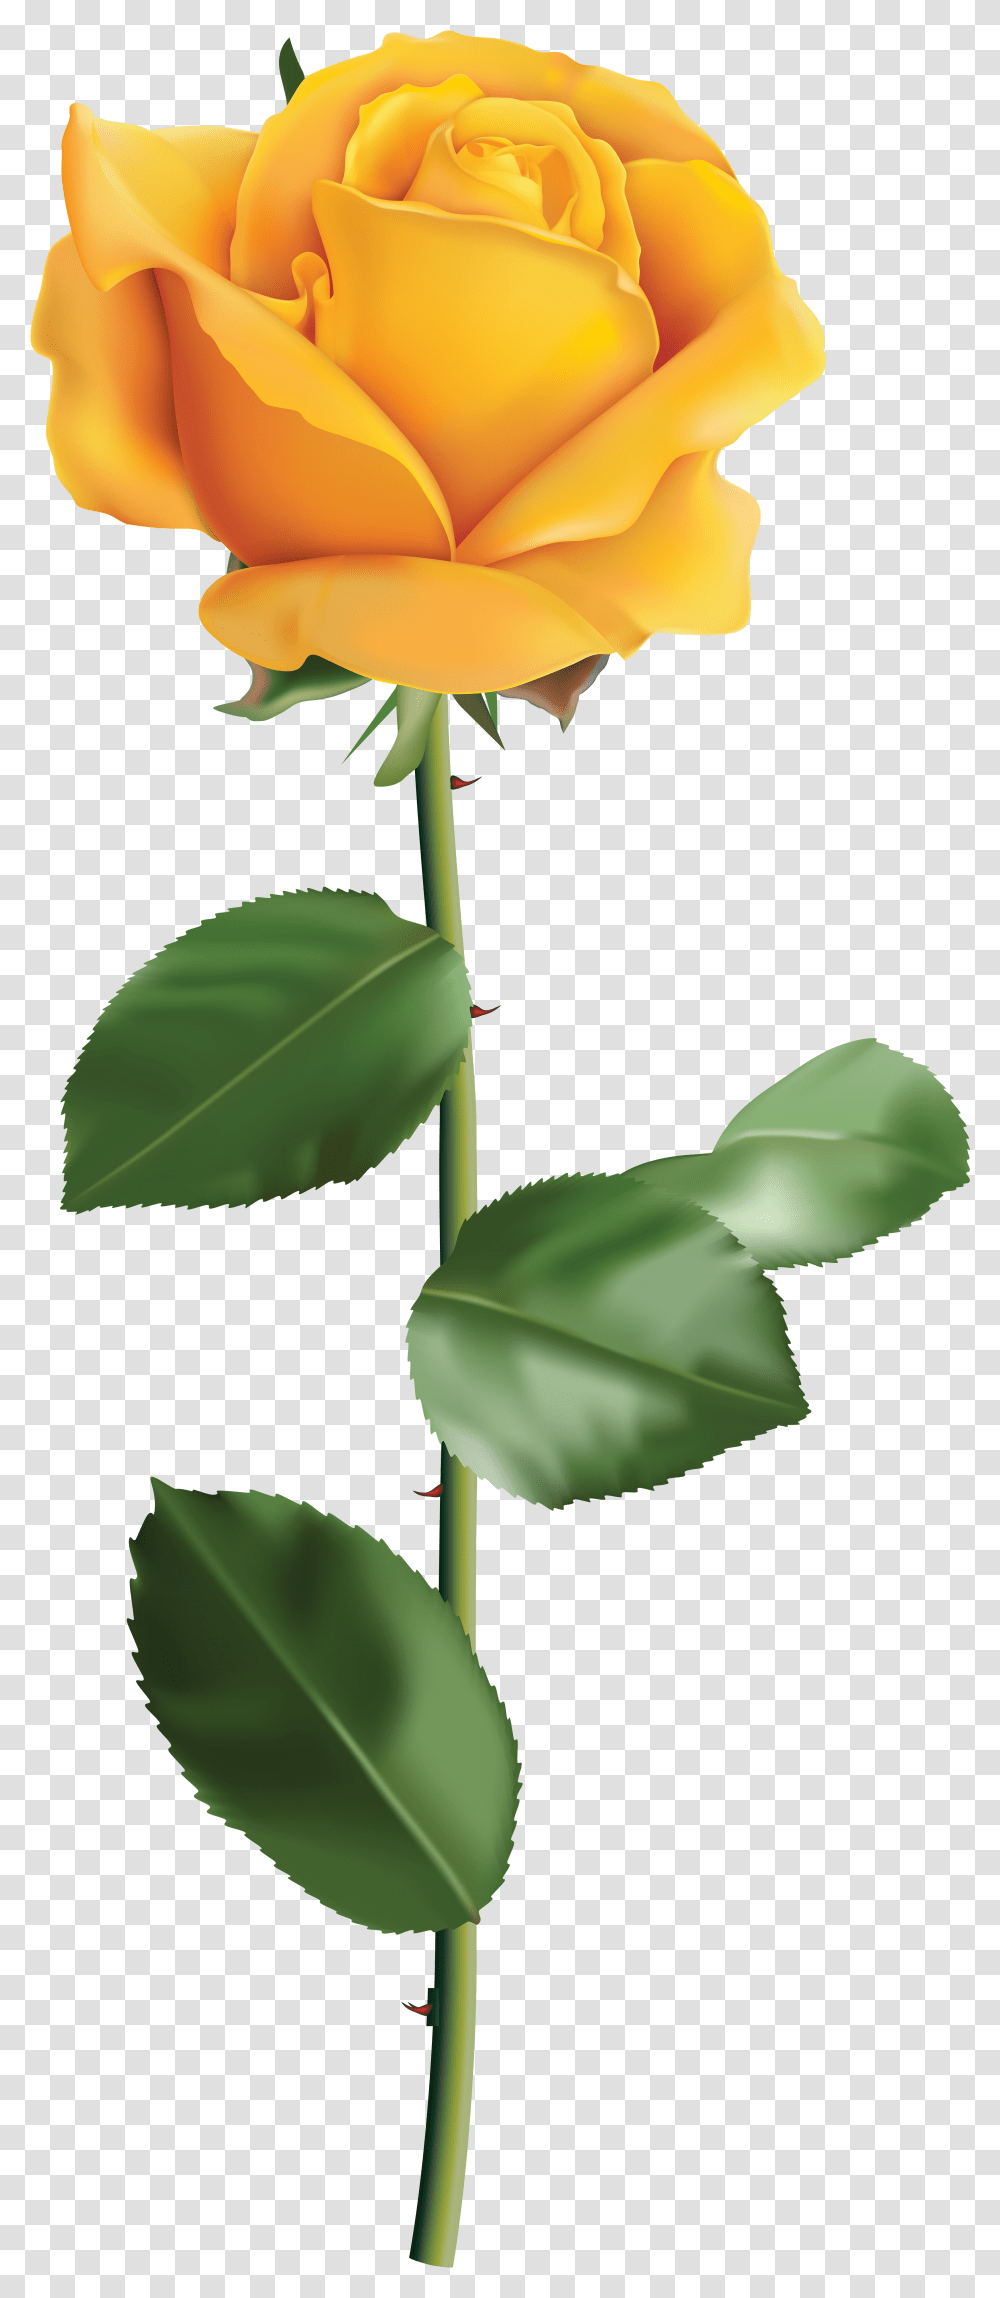 Roses Yellow Rose No Background Transparent Png